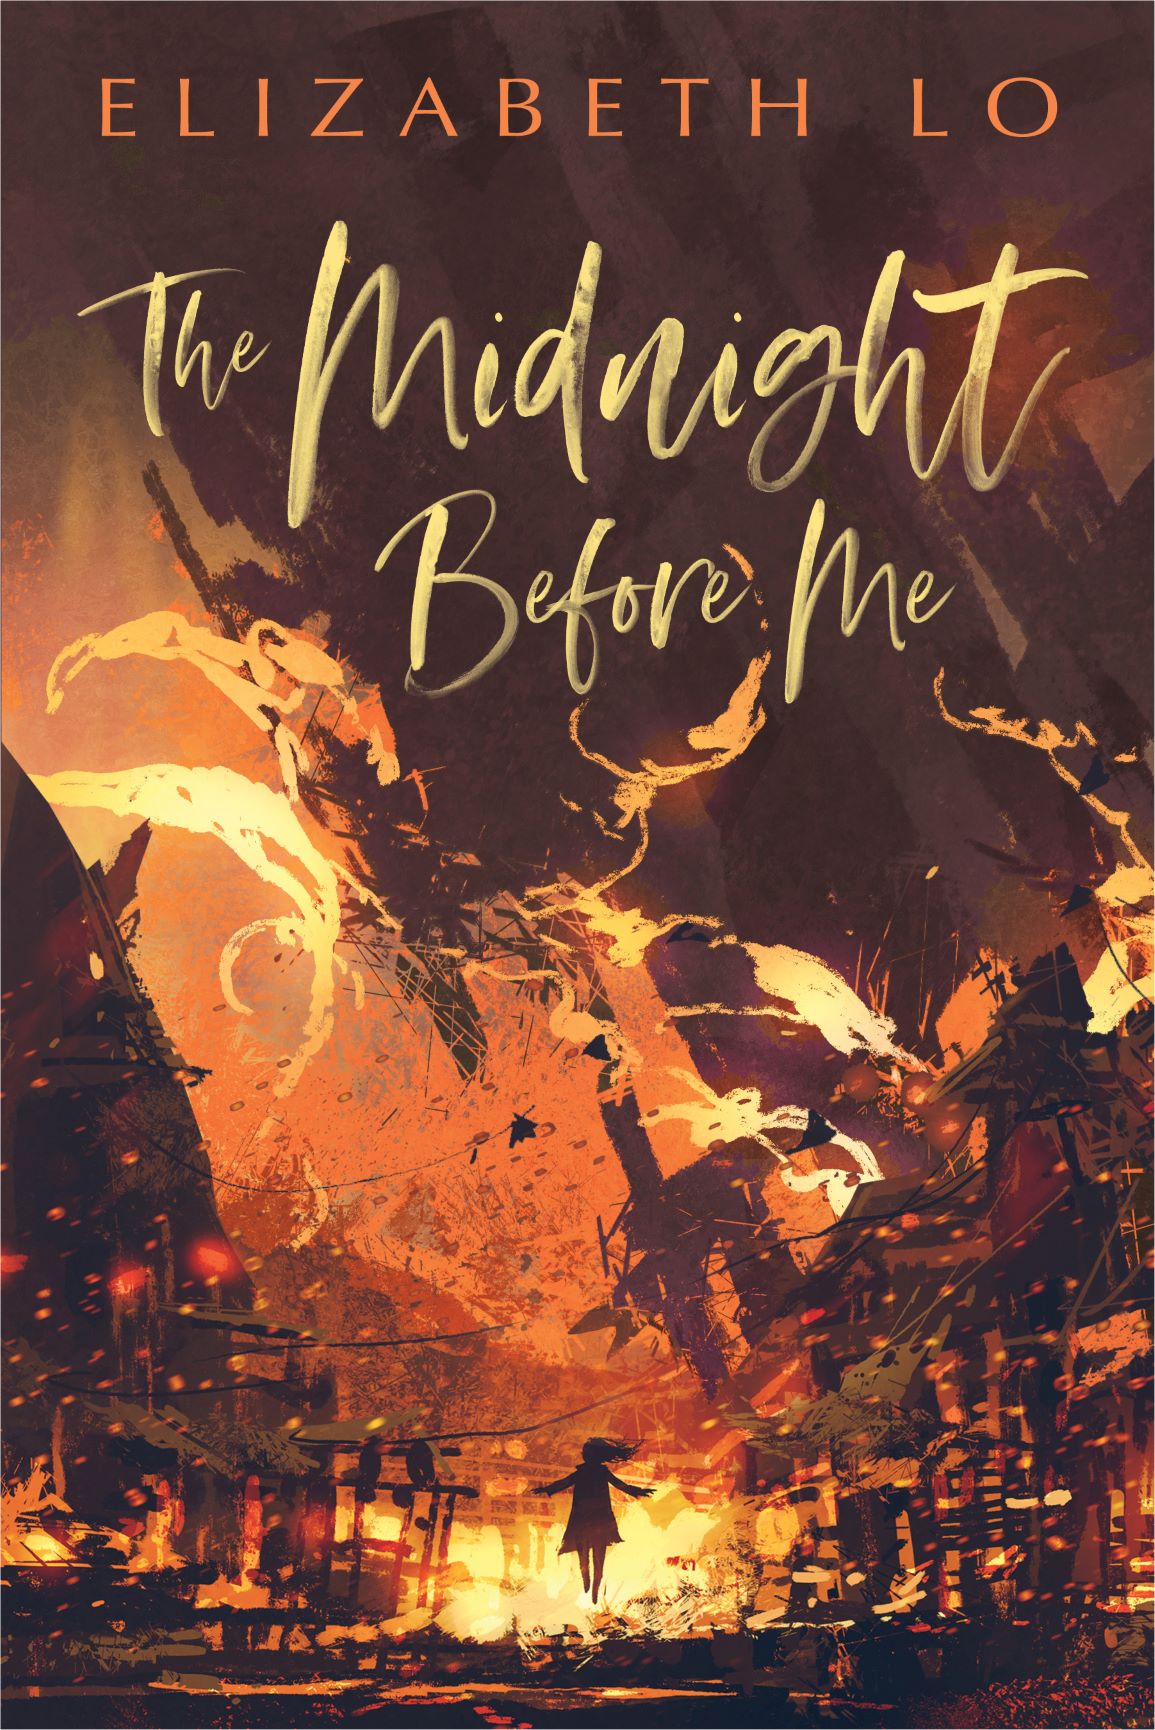 FREE: The Midnight Before Me by Elizabeth Lo